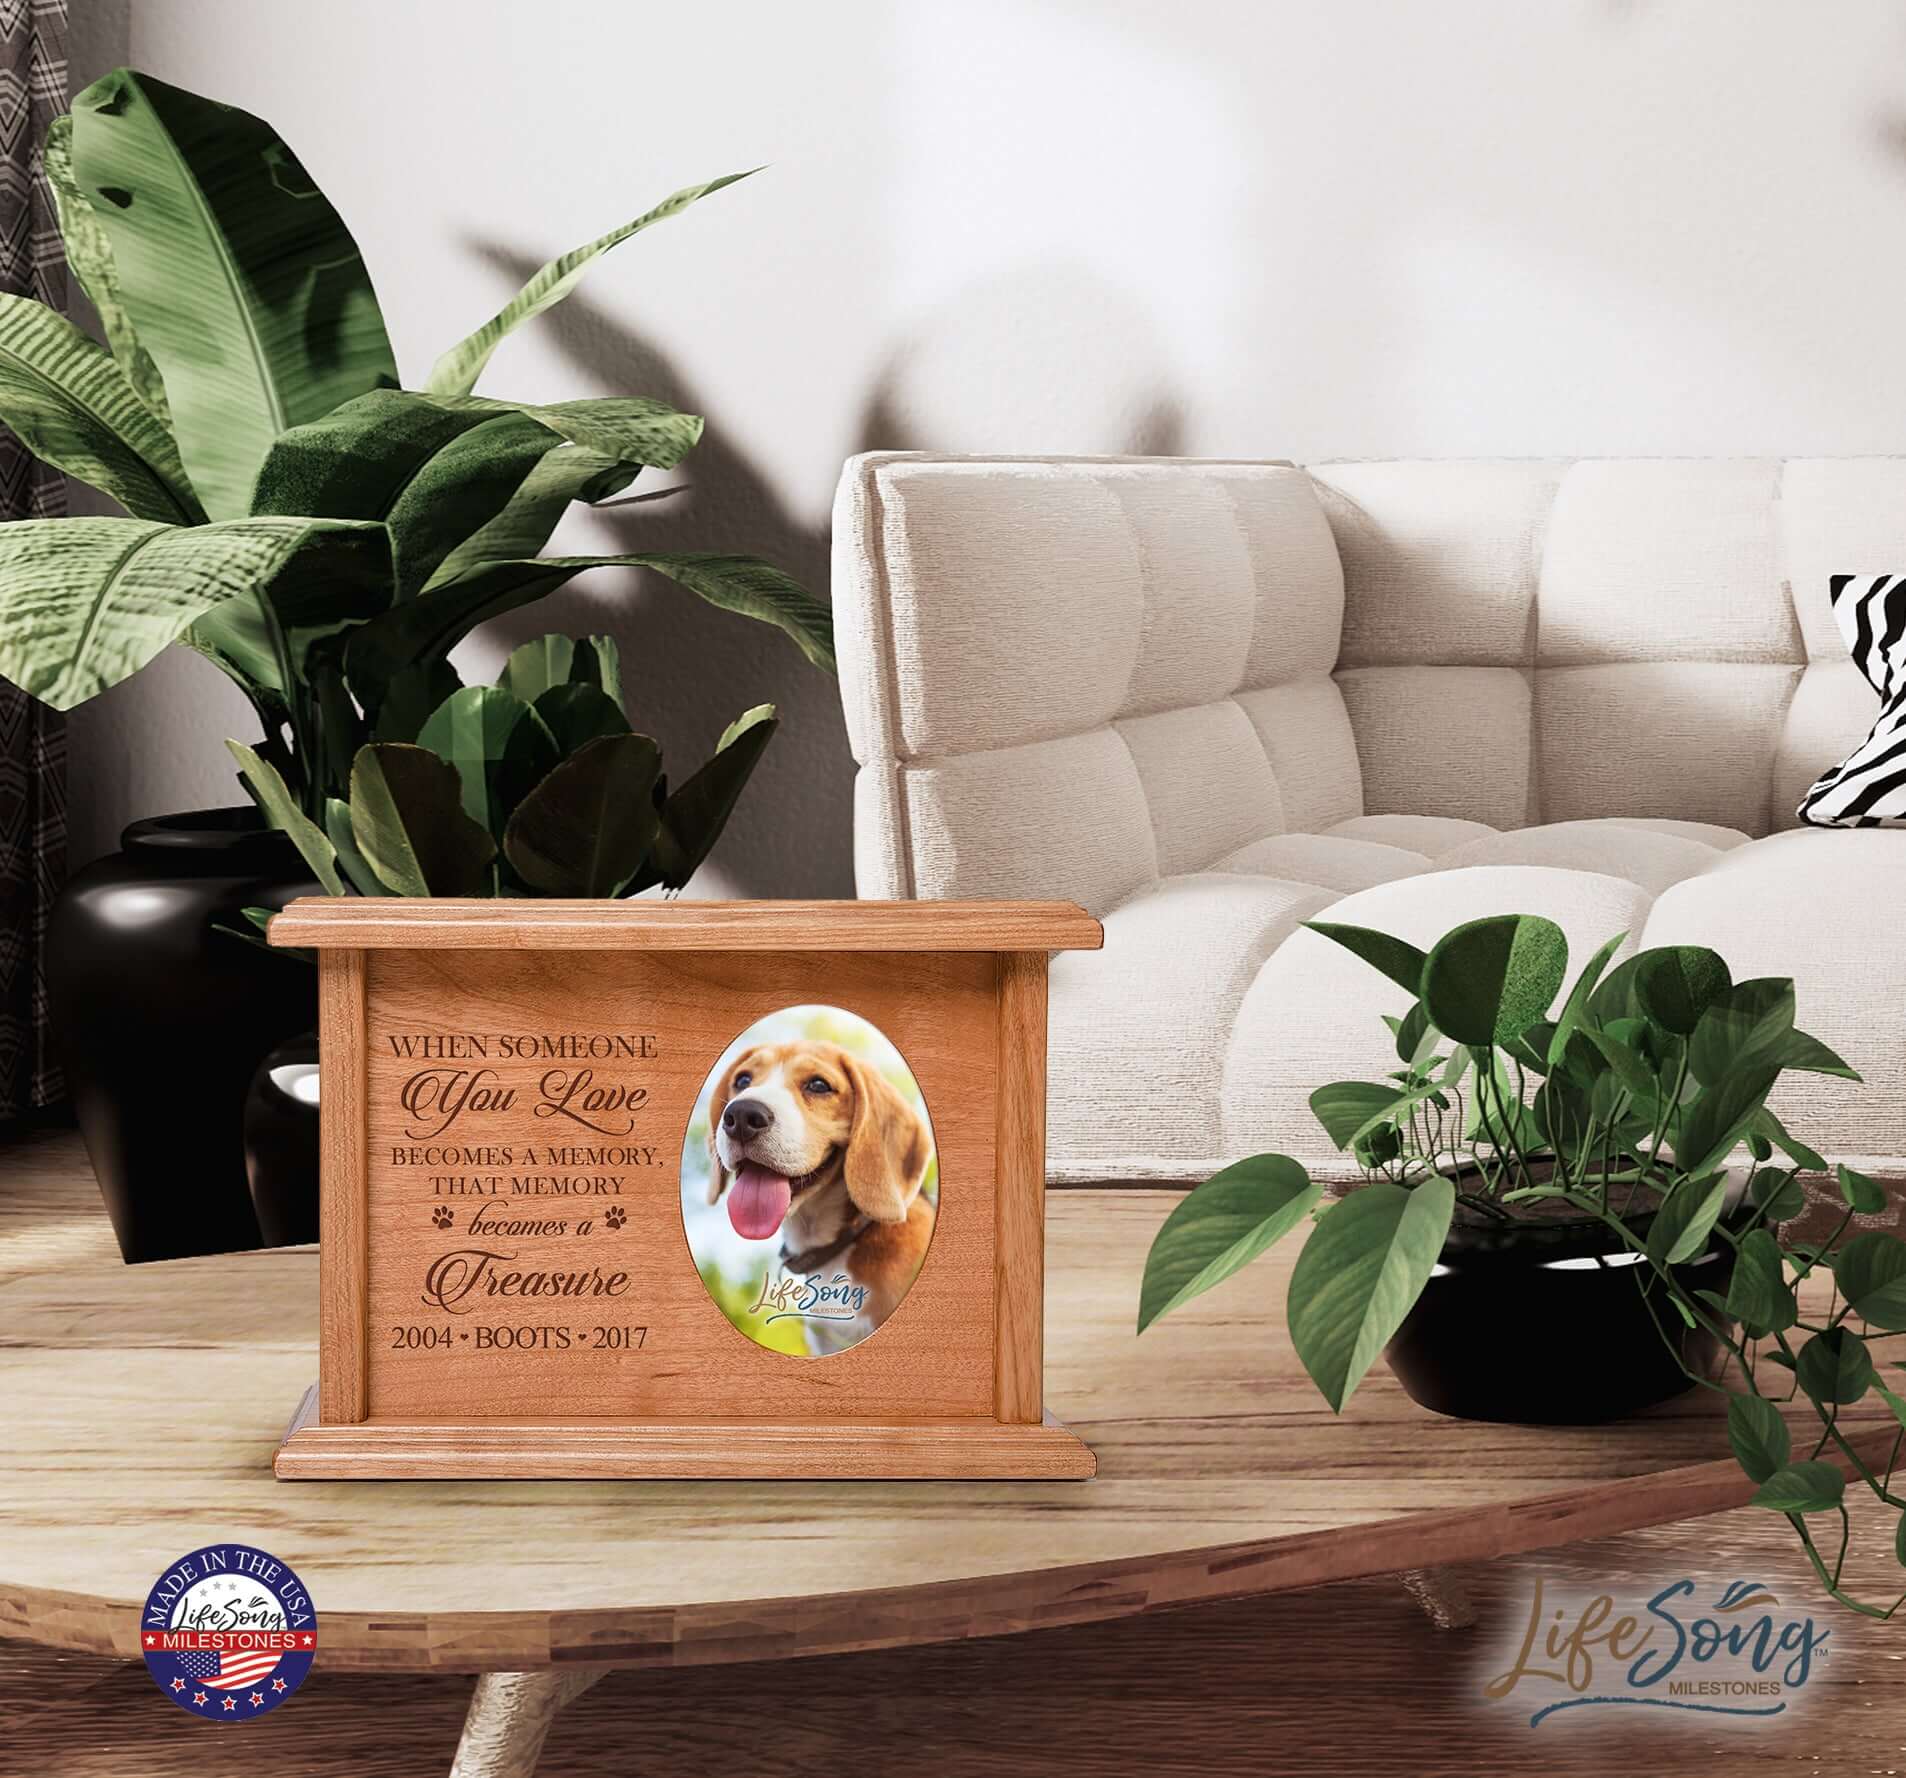 Pet Memorial Picture Cremation Urn Box for Dog or Cat - When Someone You Love Becomes A Memory